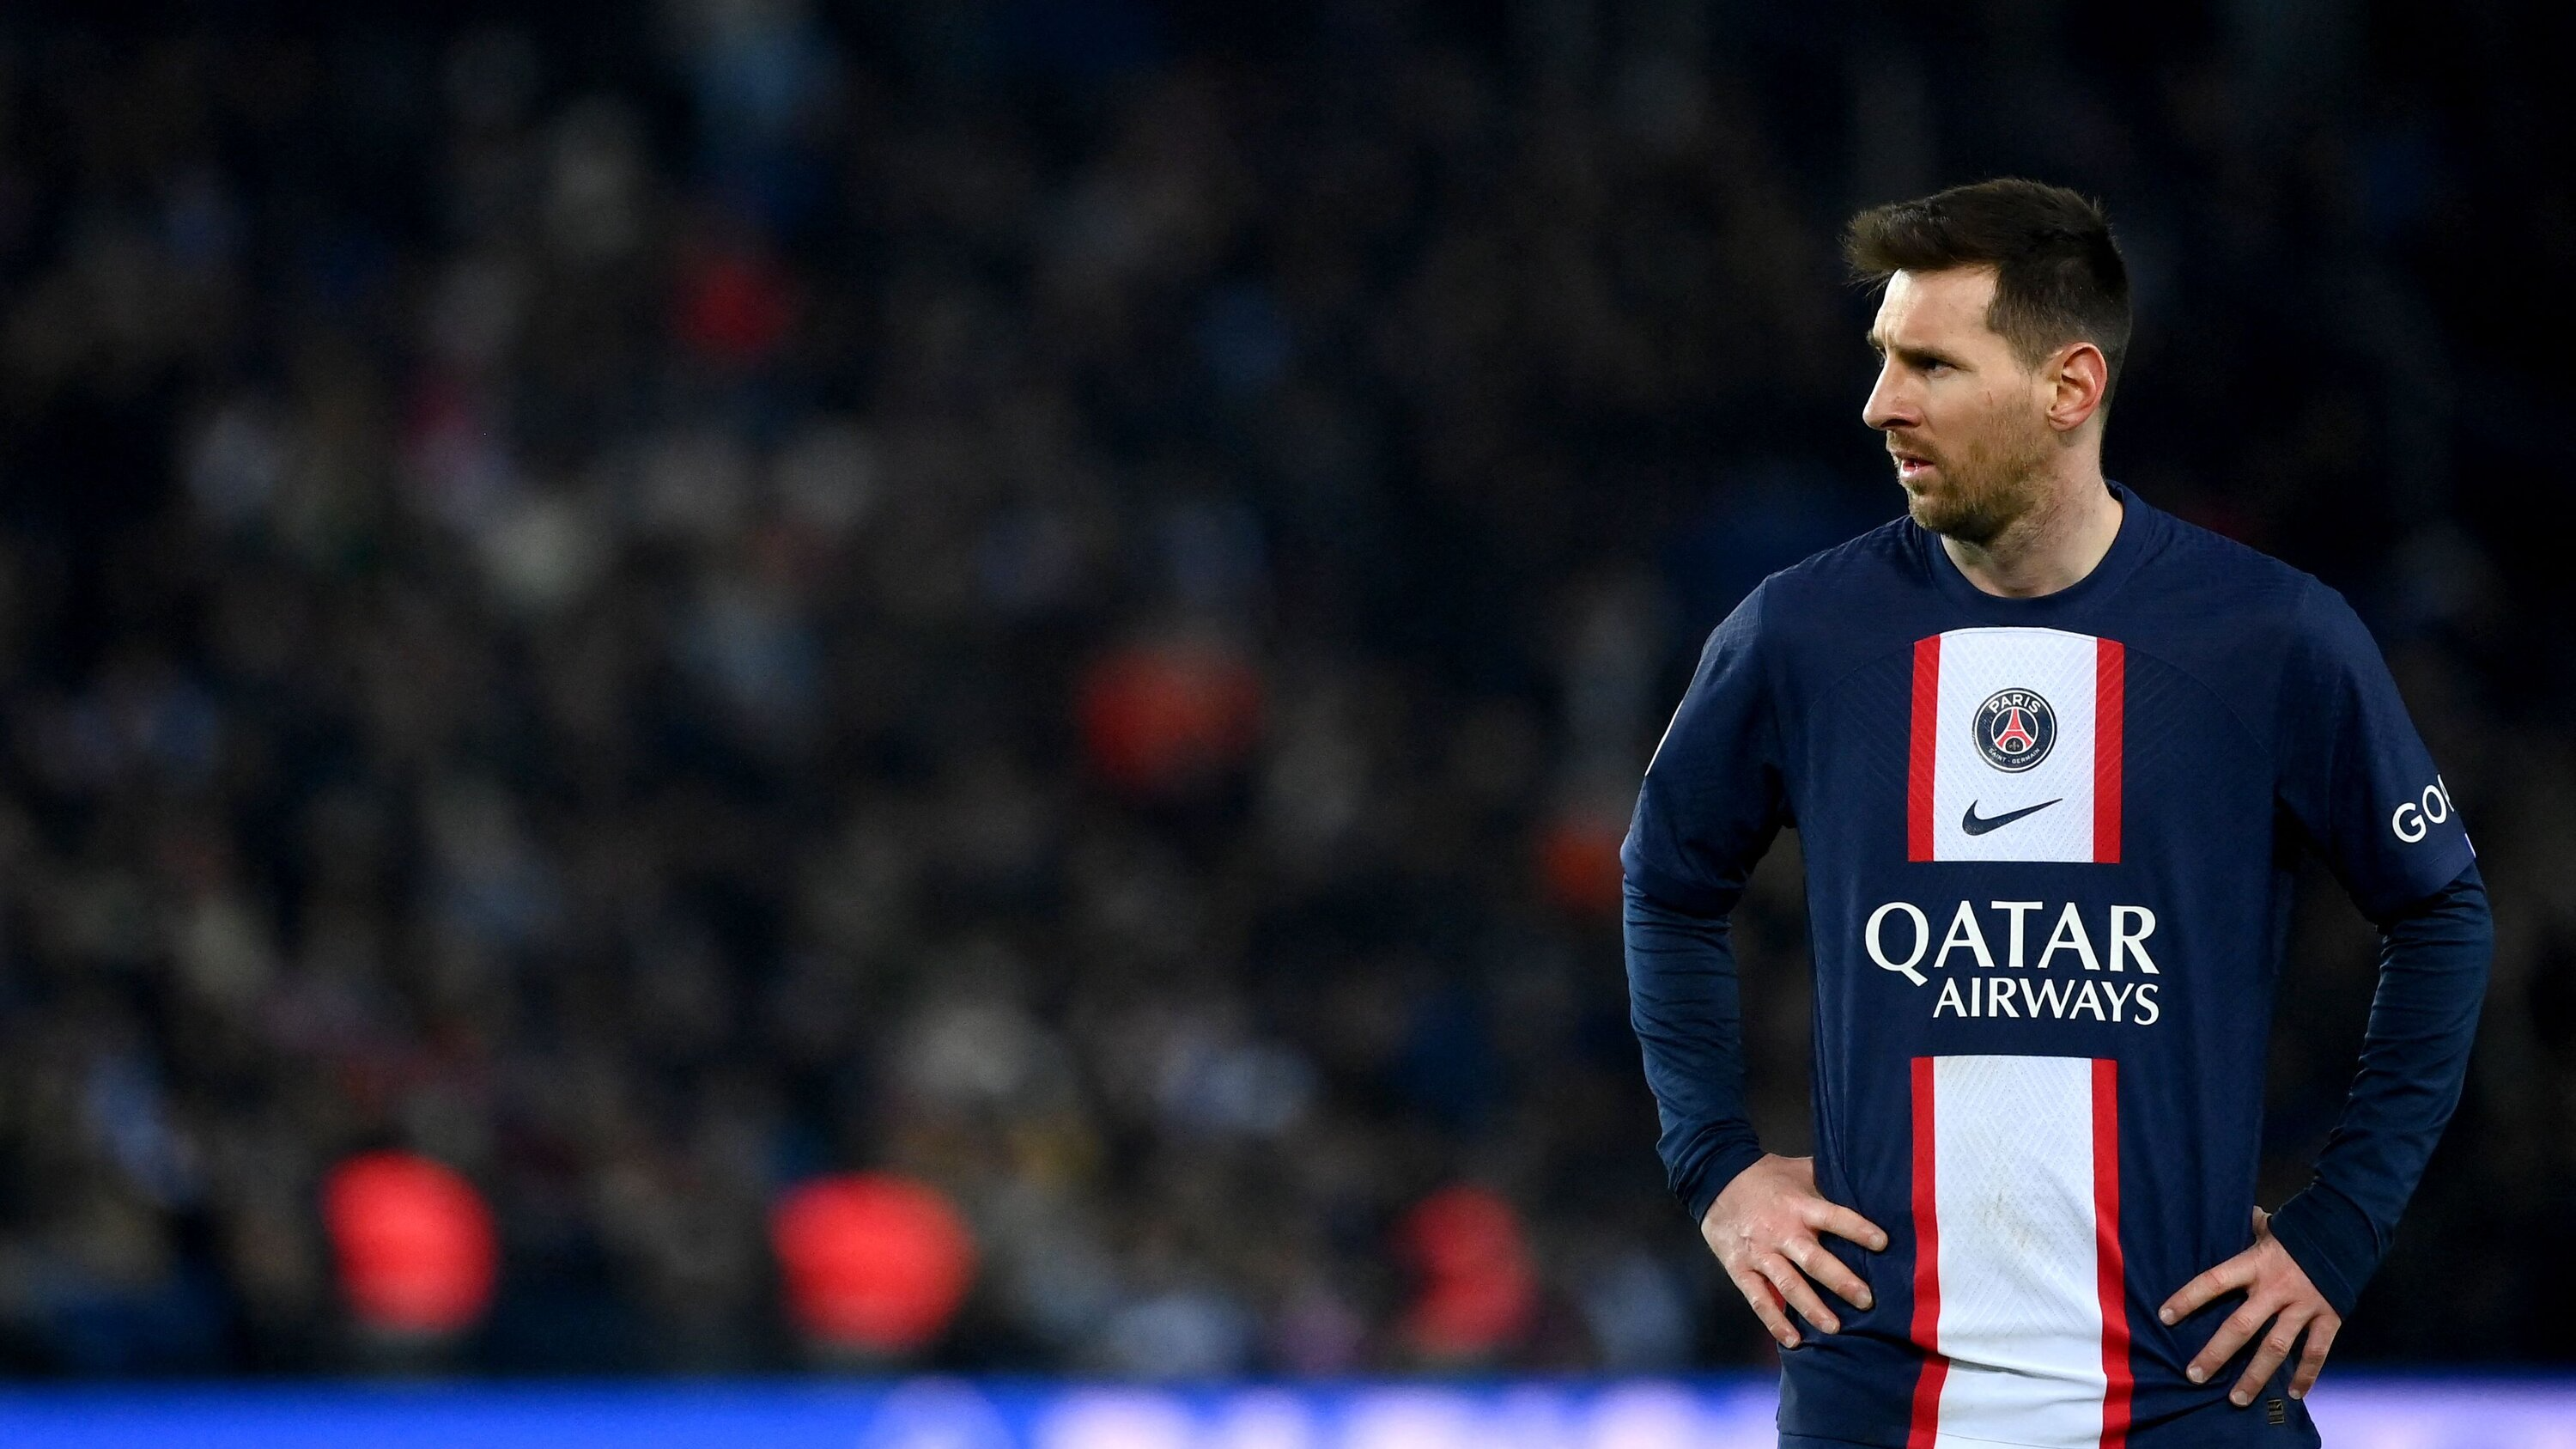 PSG Manager Announces Messi's Leaving After Season